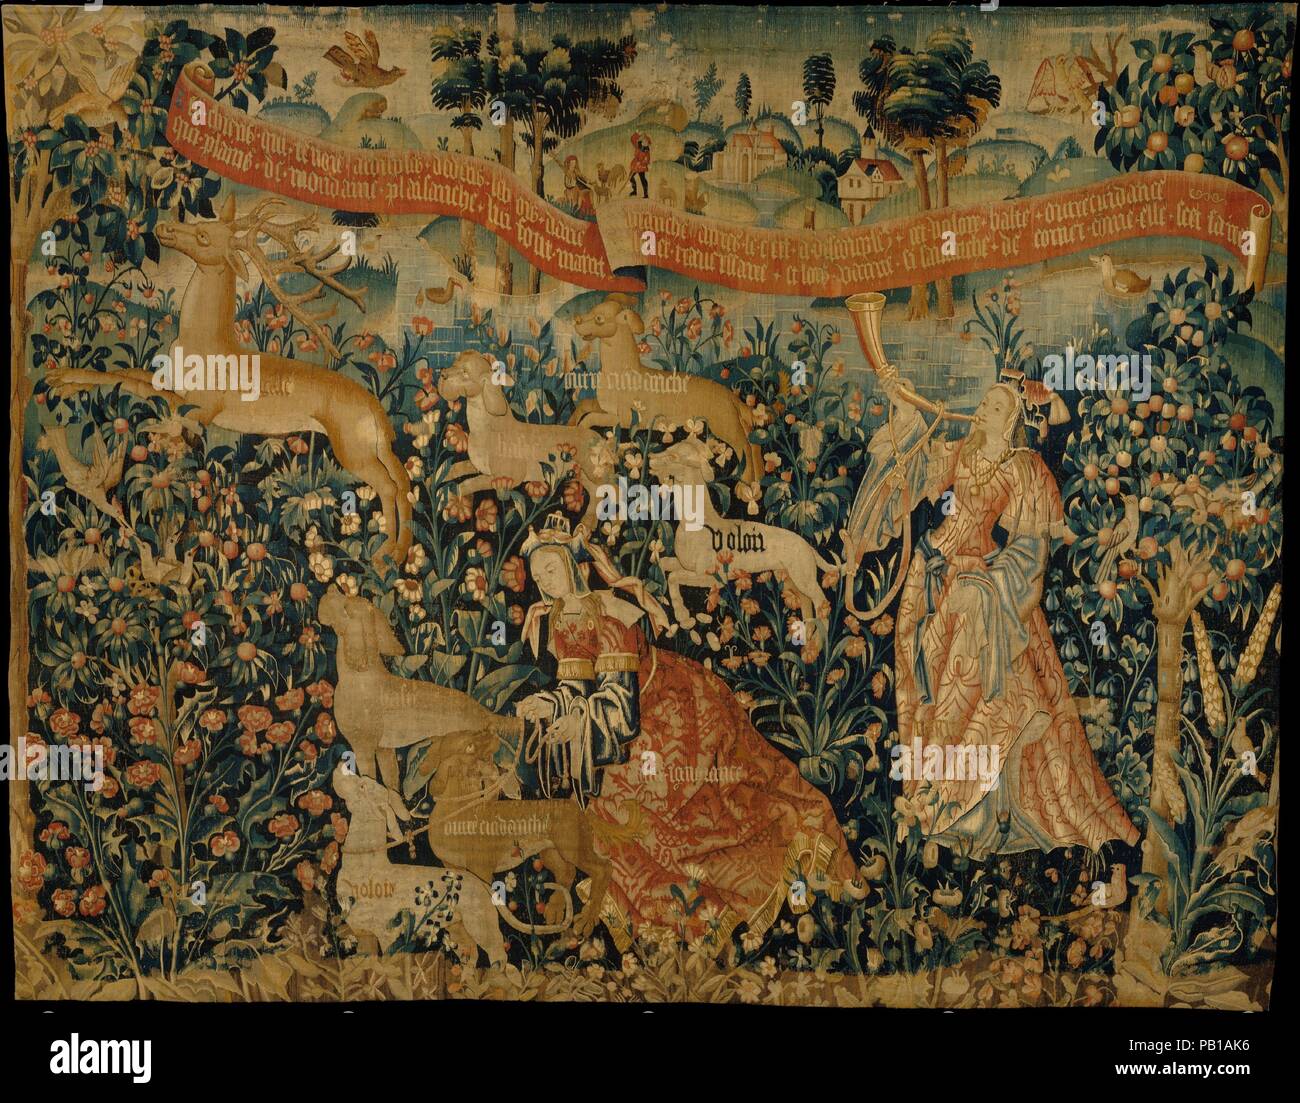 Vanity Sounds the Horn and Ignorance Unleashes the Hounds Overconfidence, Rashness, and Desire (from The Hunt of the Frail Stag). Culture: South Netherlandish. Dimensions: Overall: 118 x 150in. (299.7 x 381cm). Date: ca. 1500-1525.  This tapestry fragment is part of a series that symbolically represents man's life on earth as a stag hunt. Man is depicted here as 'the fragile stag' at the upper left bounding through the woods. The stag is being hunted by Desire, Rashness, and Overconfidence, the hunting dogs set loose by Ignorance, portrayed as an elegantly dressed woman at the bottom center of Stock Photo